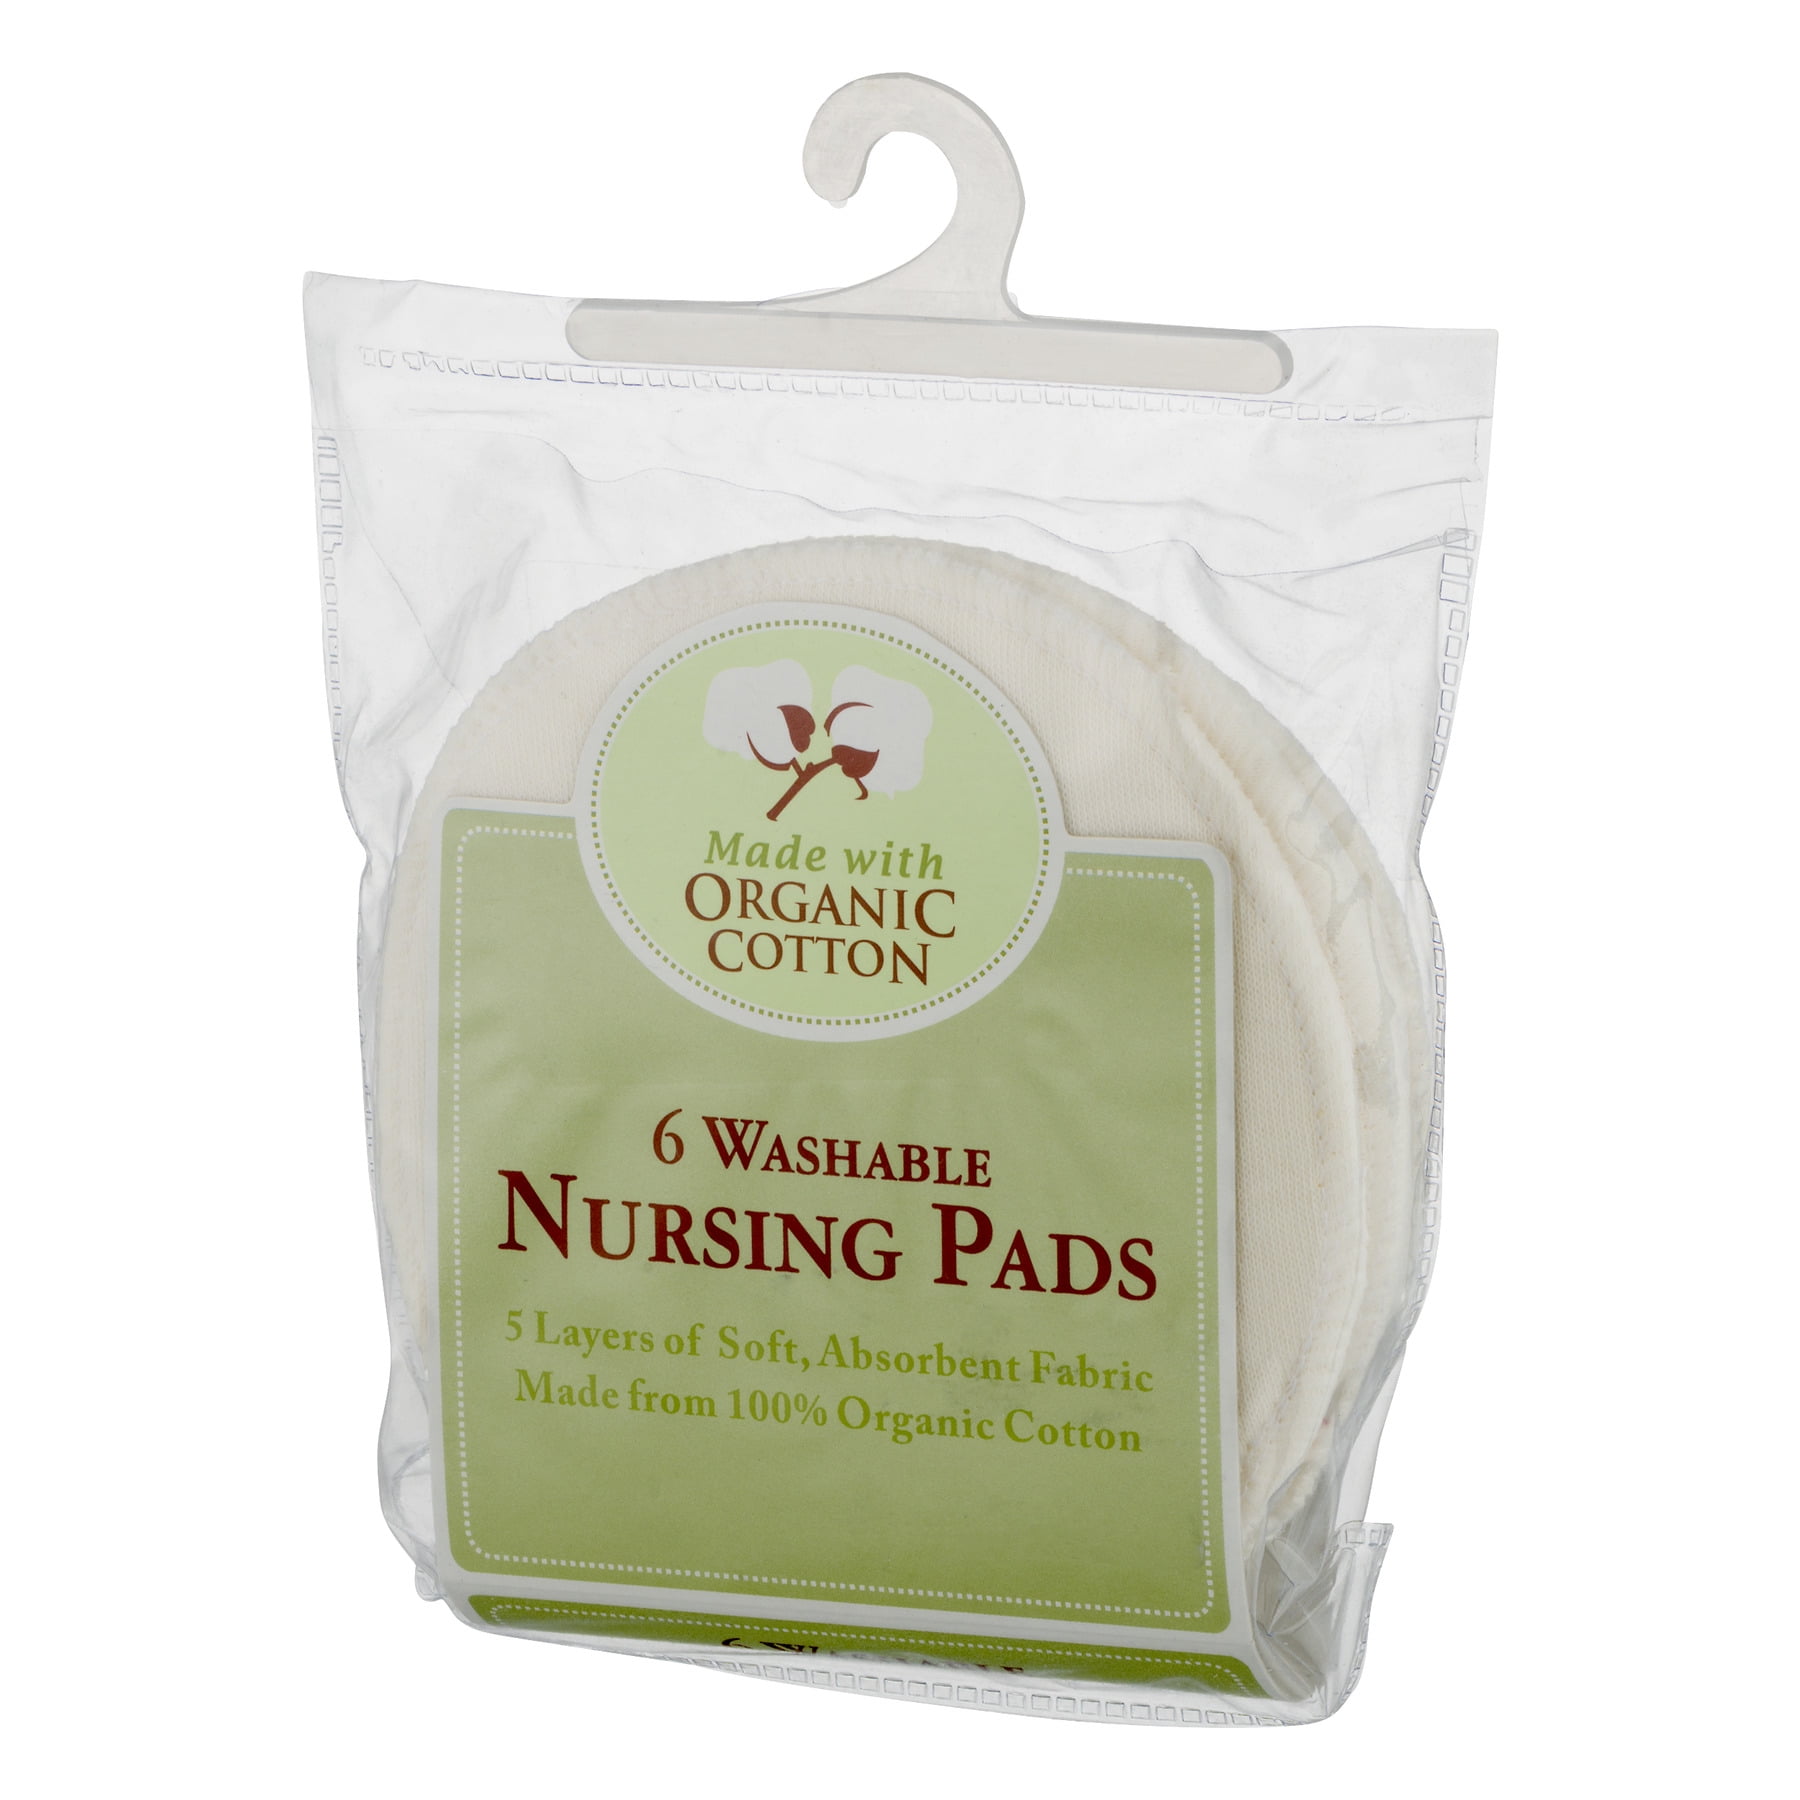  TL Care Nursing Pads Made with Organic Cotton, Natural Color,  6 Count : Nursing Bra Pads : Baby